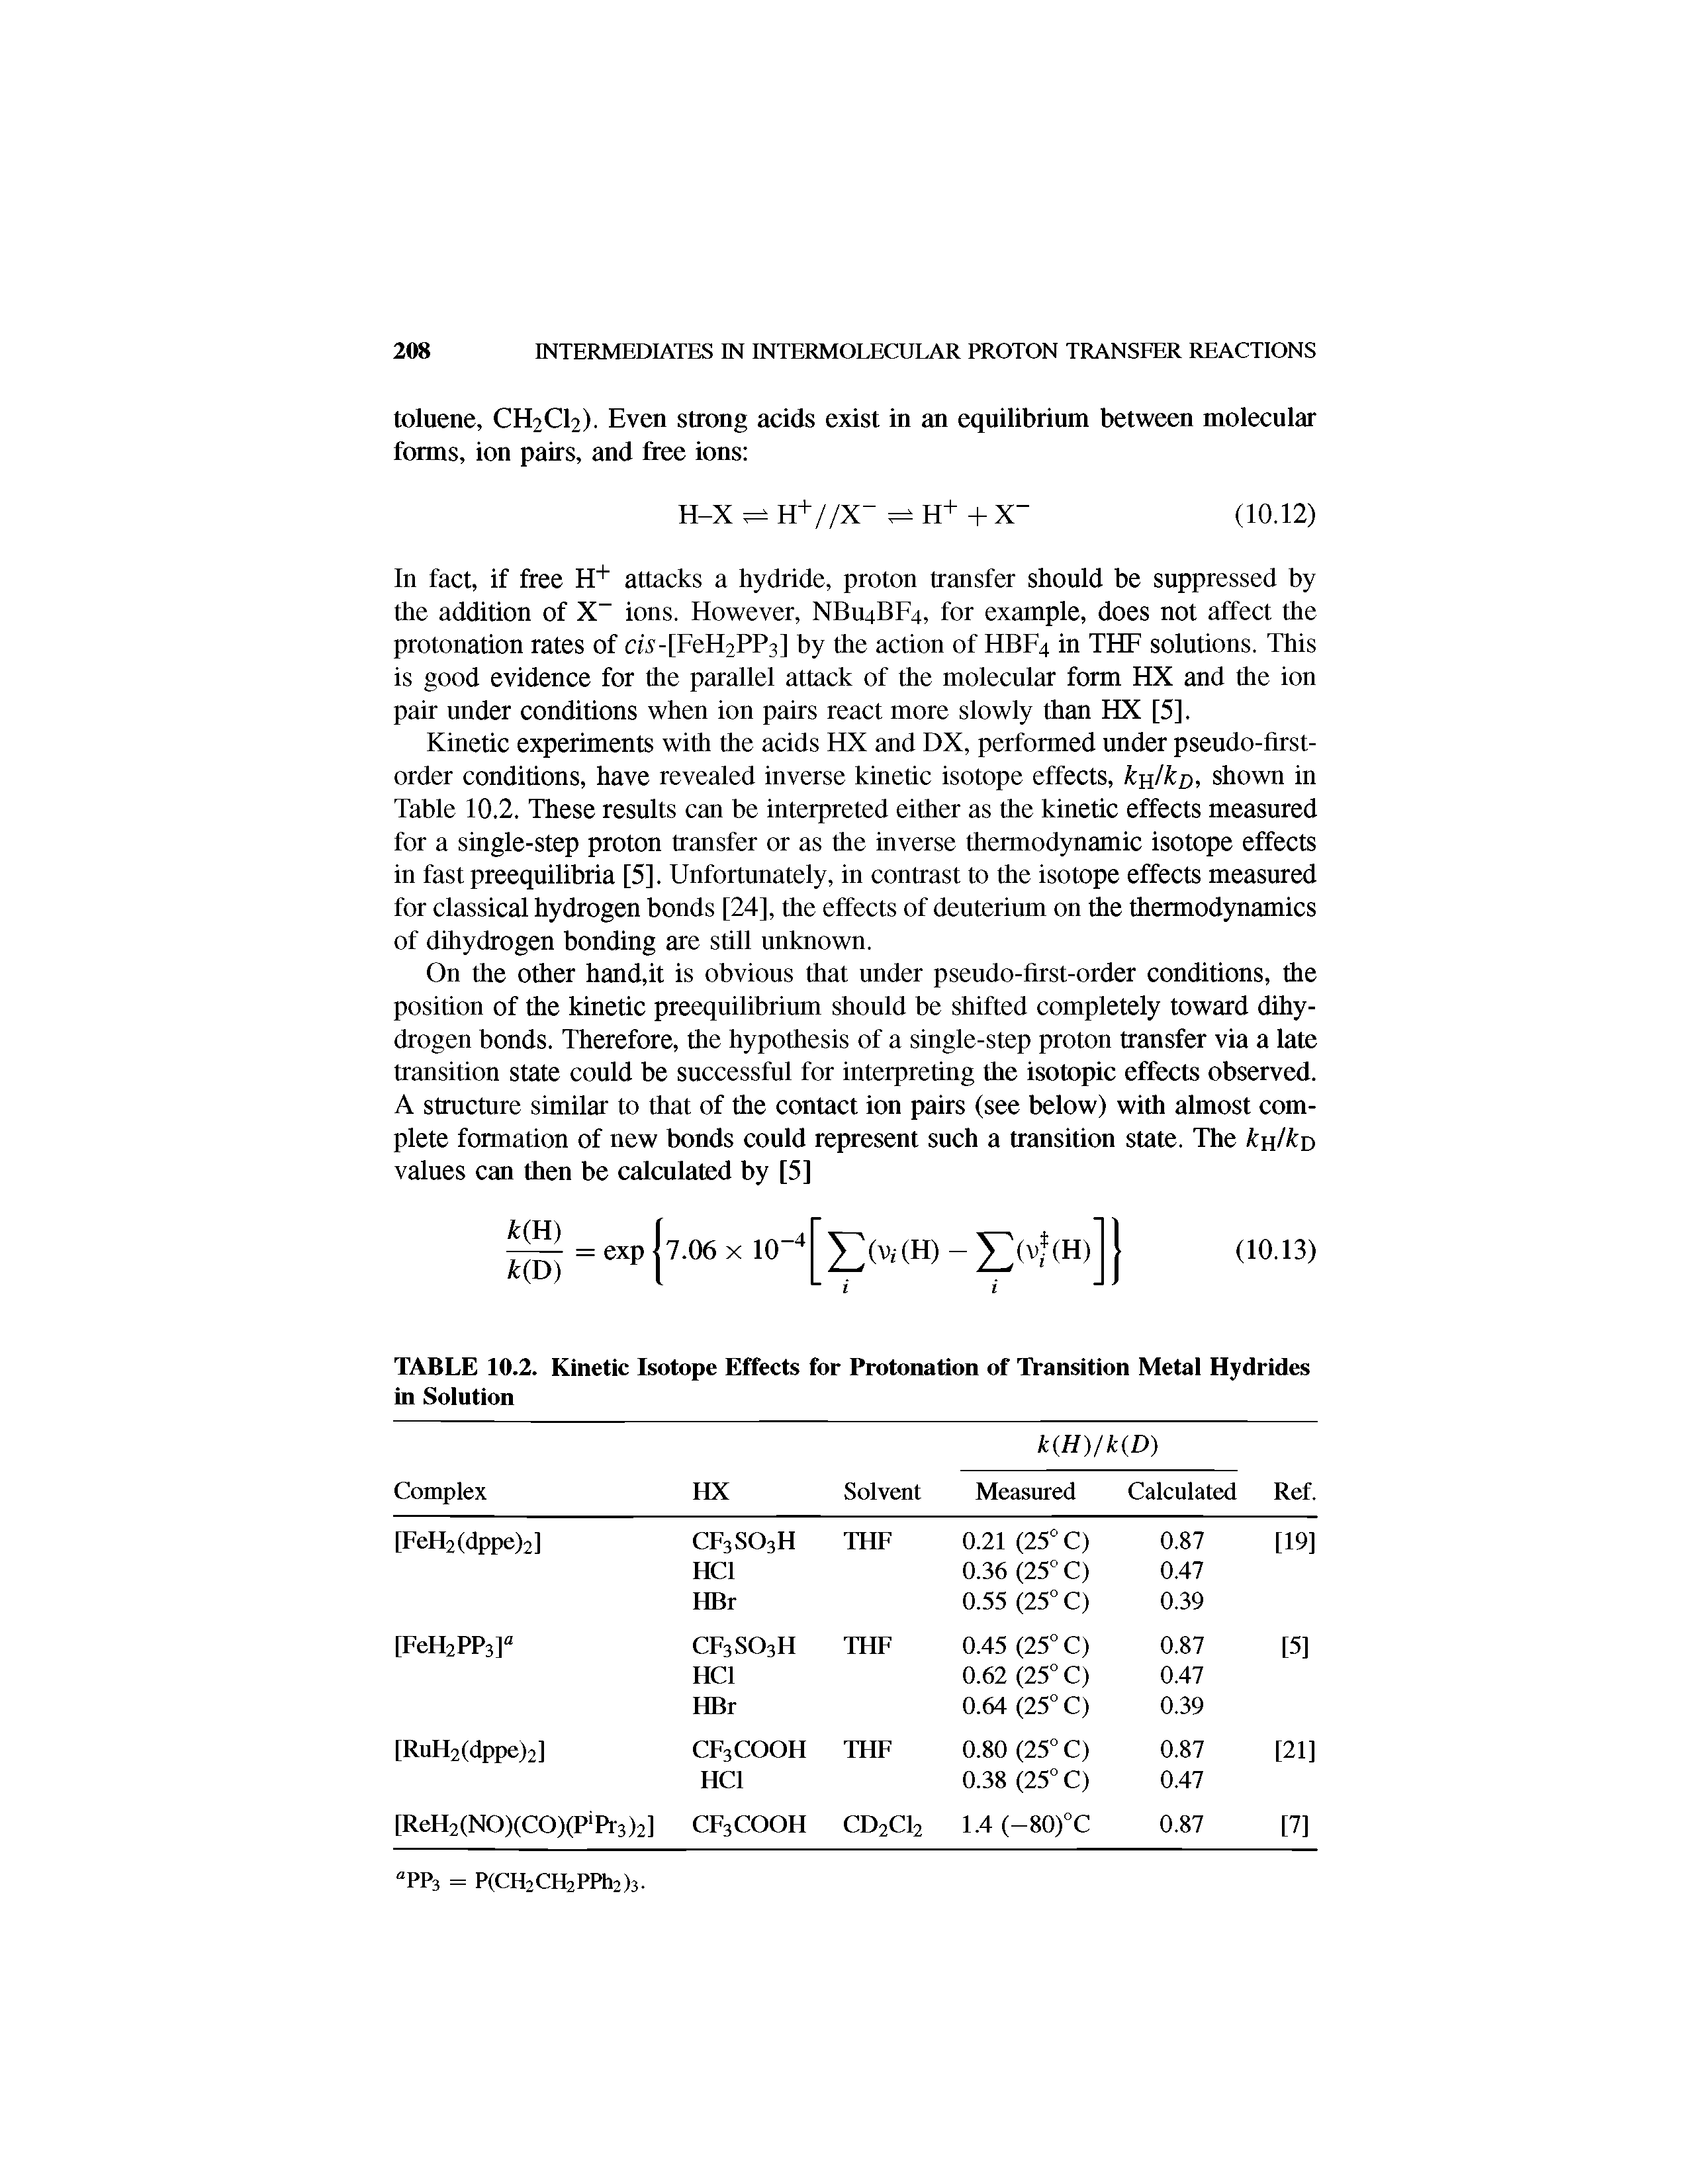 Table 10.2. These results can be interpreted either as the kinetic effects measured for a single-step proton transfer or as the inverse thermodynamic isotope effects in fast preequilibria [5]. Unfortunately, in contrast to the isotope effects measured for classical hydrogen bonds [24], the effects of denterinm on the thermodynamics of dihydrogen bonding are still nnknown.